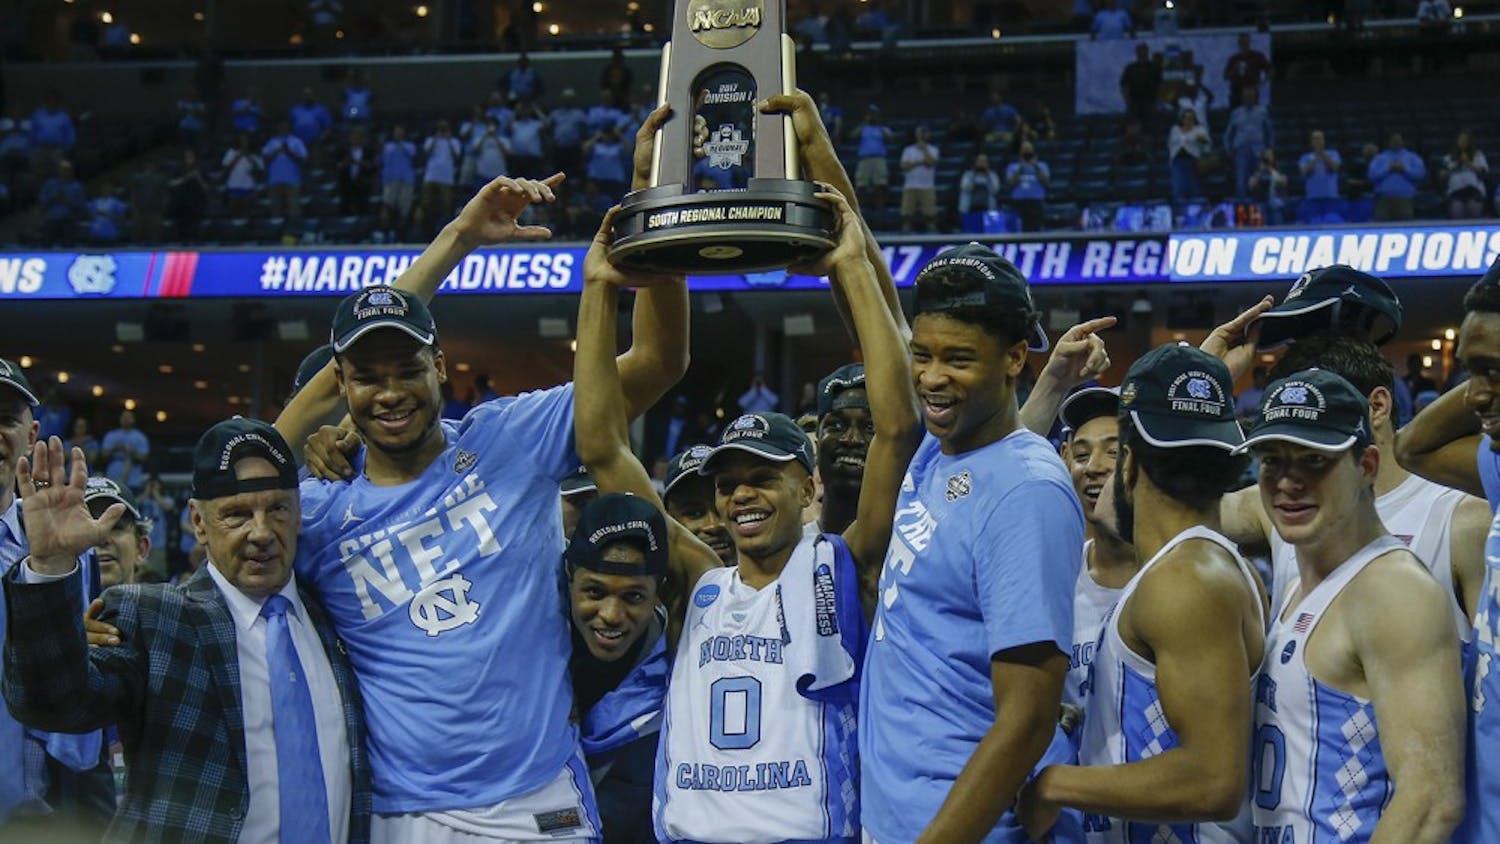 The North Carolina men's basketball team hoists up the South Regional Champion trophy fter defeating Kentucky in the Elite Eight in Memphis on Sunday.